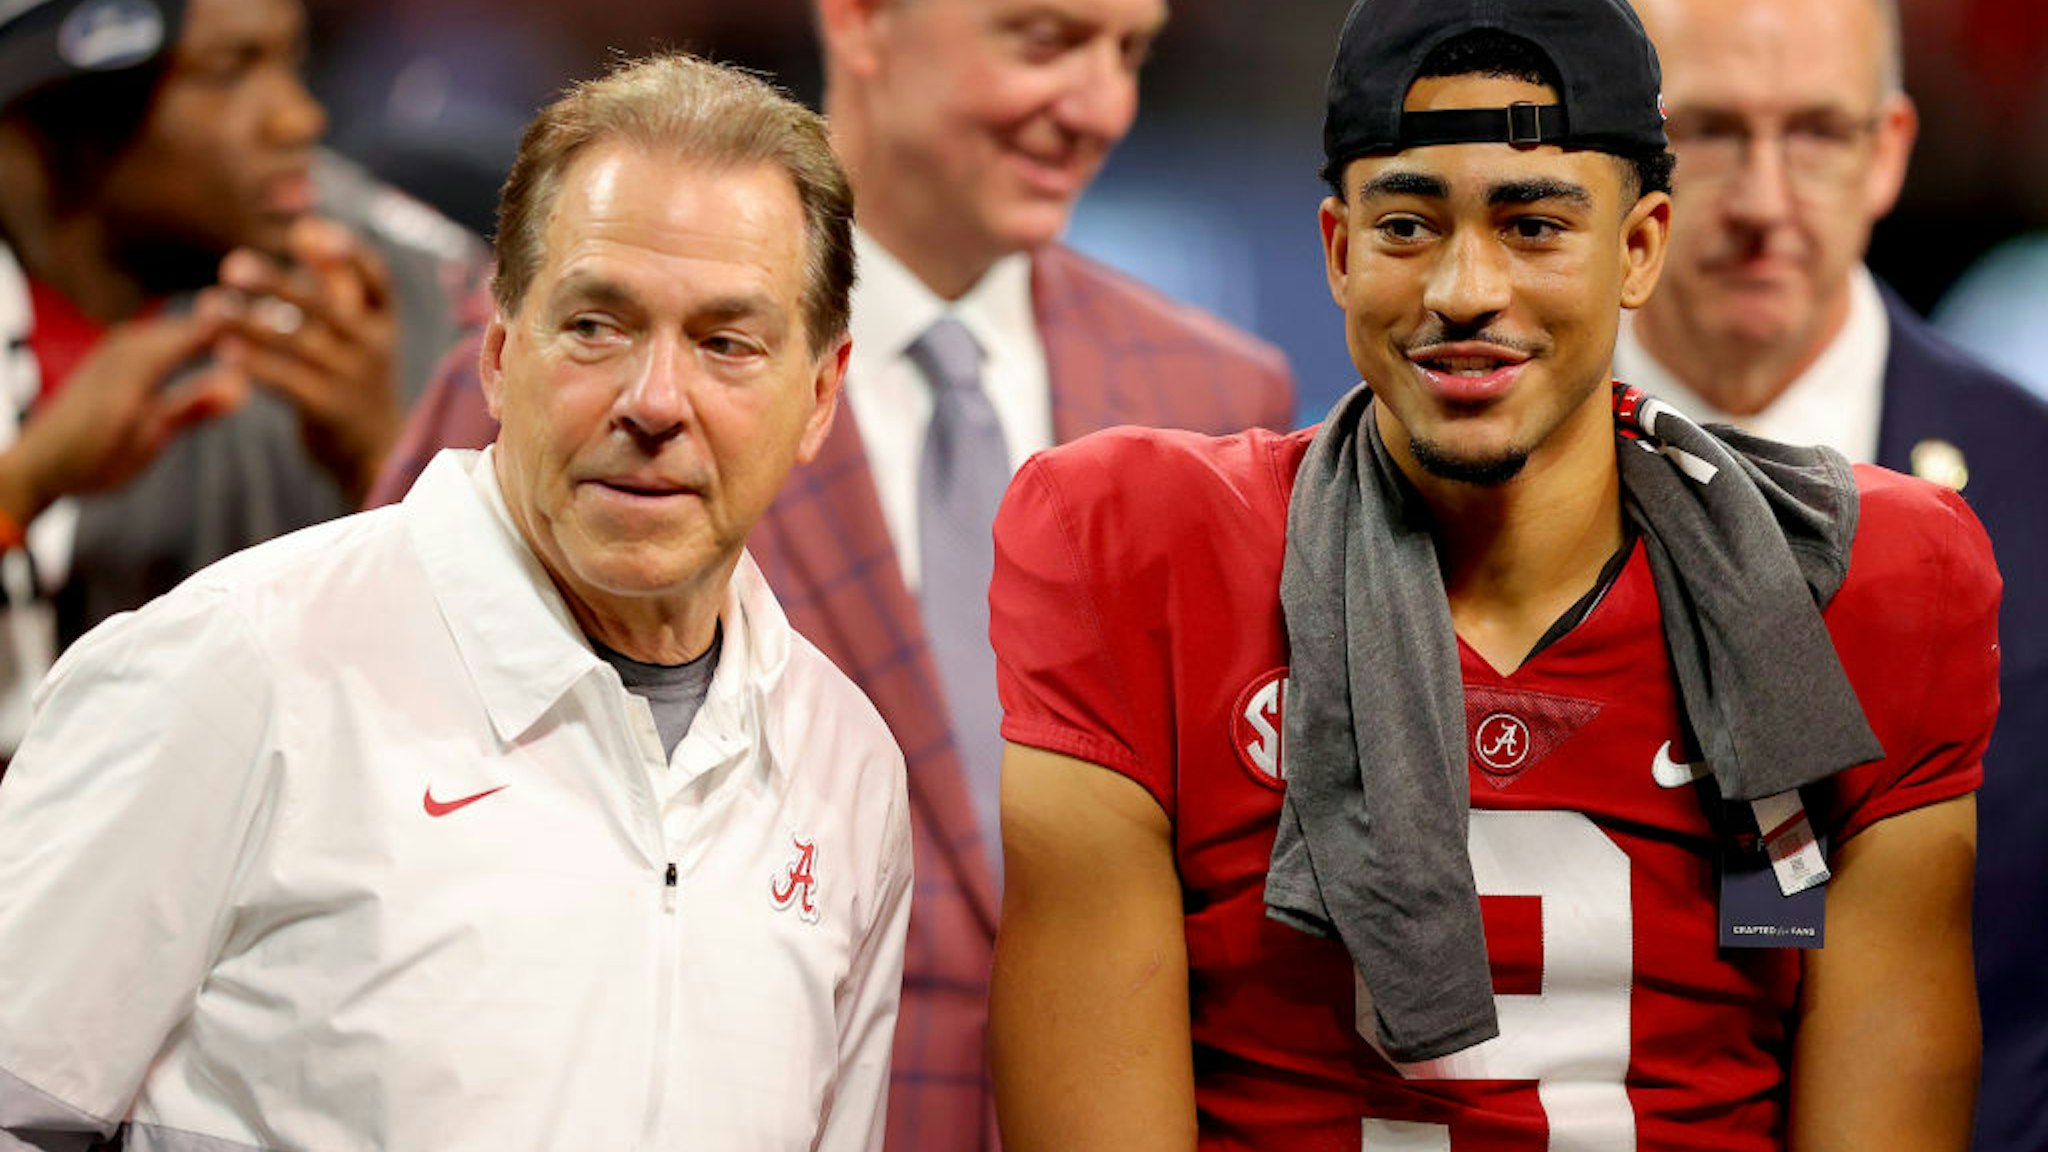 ATLANTA, GEORGIA - DECEMBER 04: Head coach Nick Saban of the Alabama Crimson Tide and Bryce Young #9 of the Alabama Crimson Tide celebrate their win against the Georgia Bulldogs in the SEC Championship game at Mercedes-Benz Stadium on December 04, 2021 in Atlanta, Georgia. (Photo by Kevin C. Cox/Getty Images)